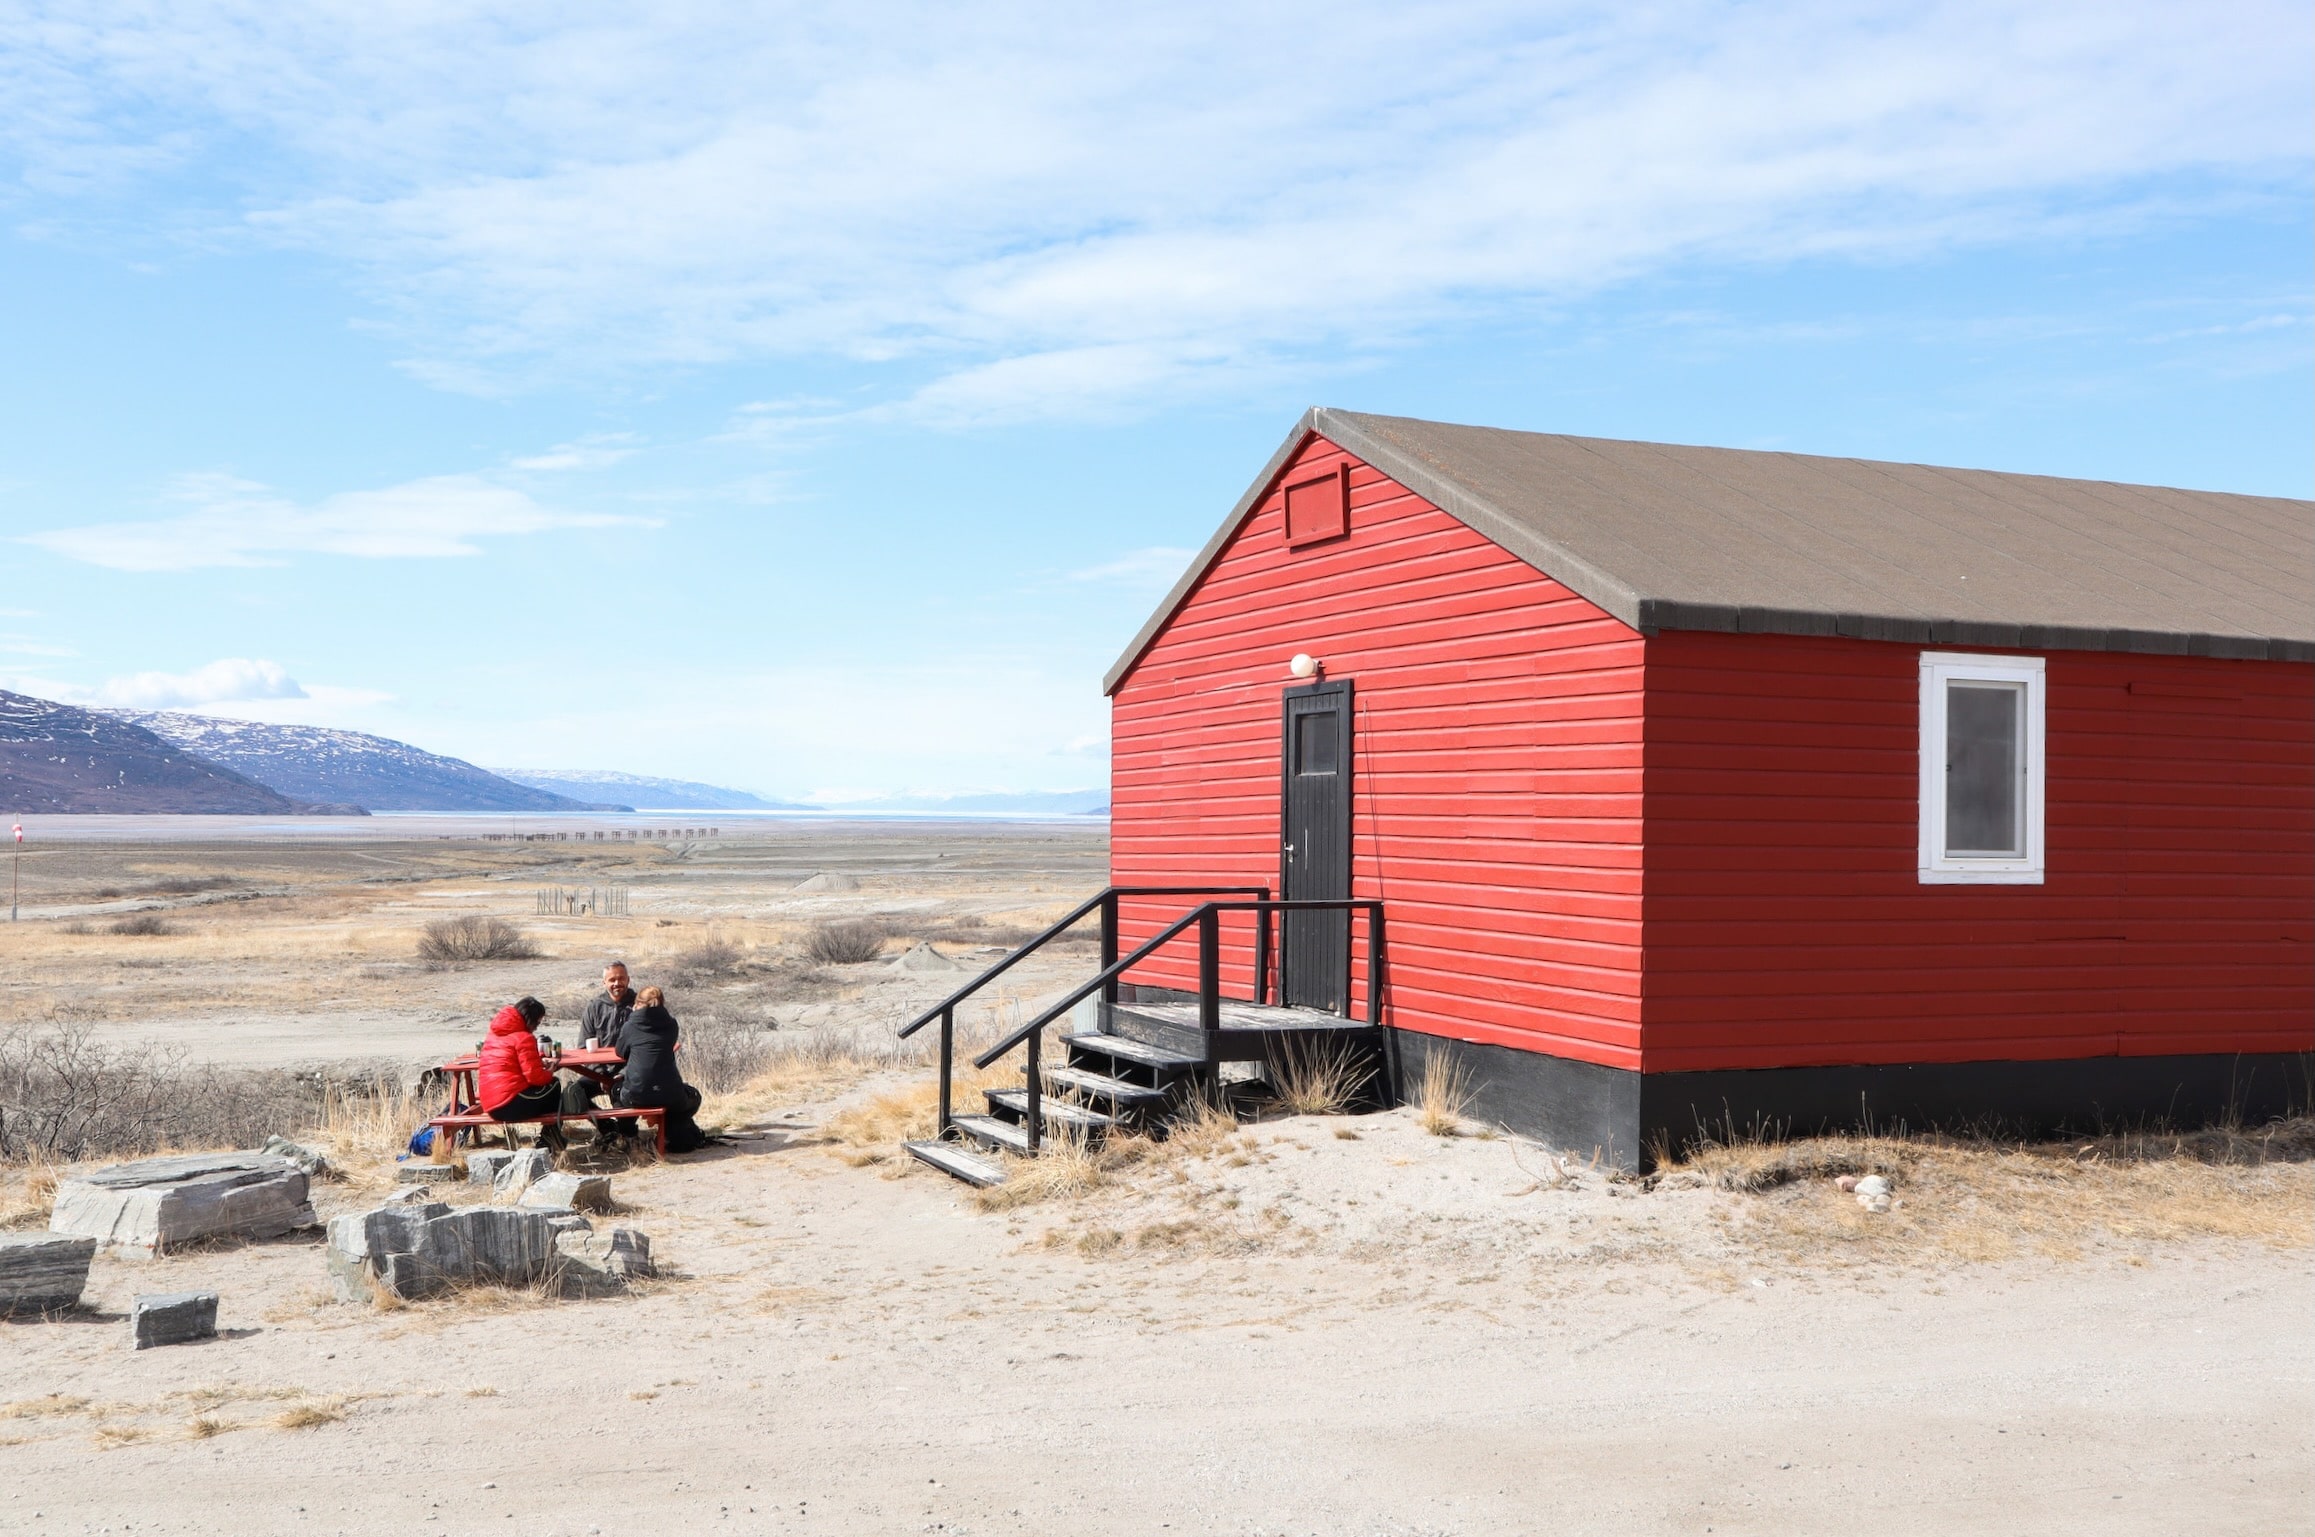 Guests at the Old Camp Hostel enjoying the sun and views in Kangerlussuaq. Photo by Johanna Himstedt